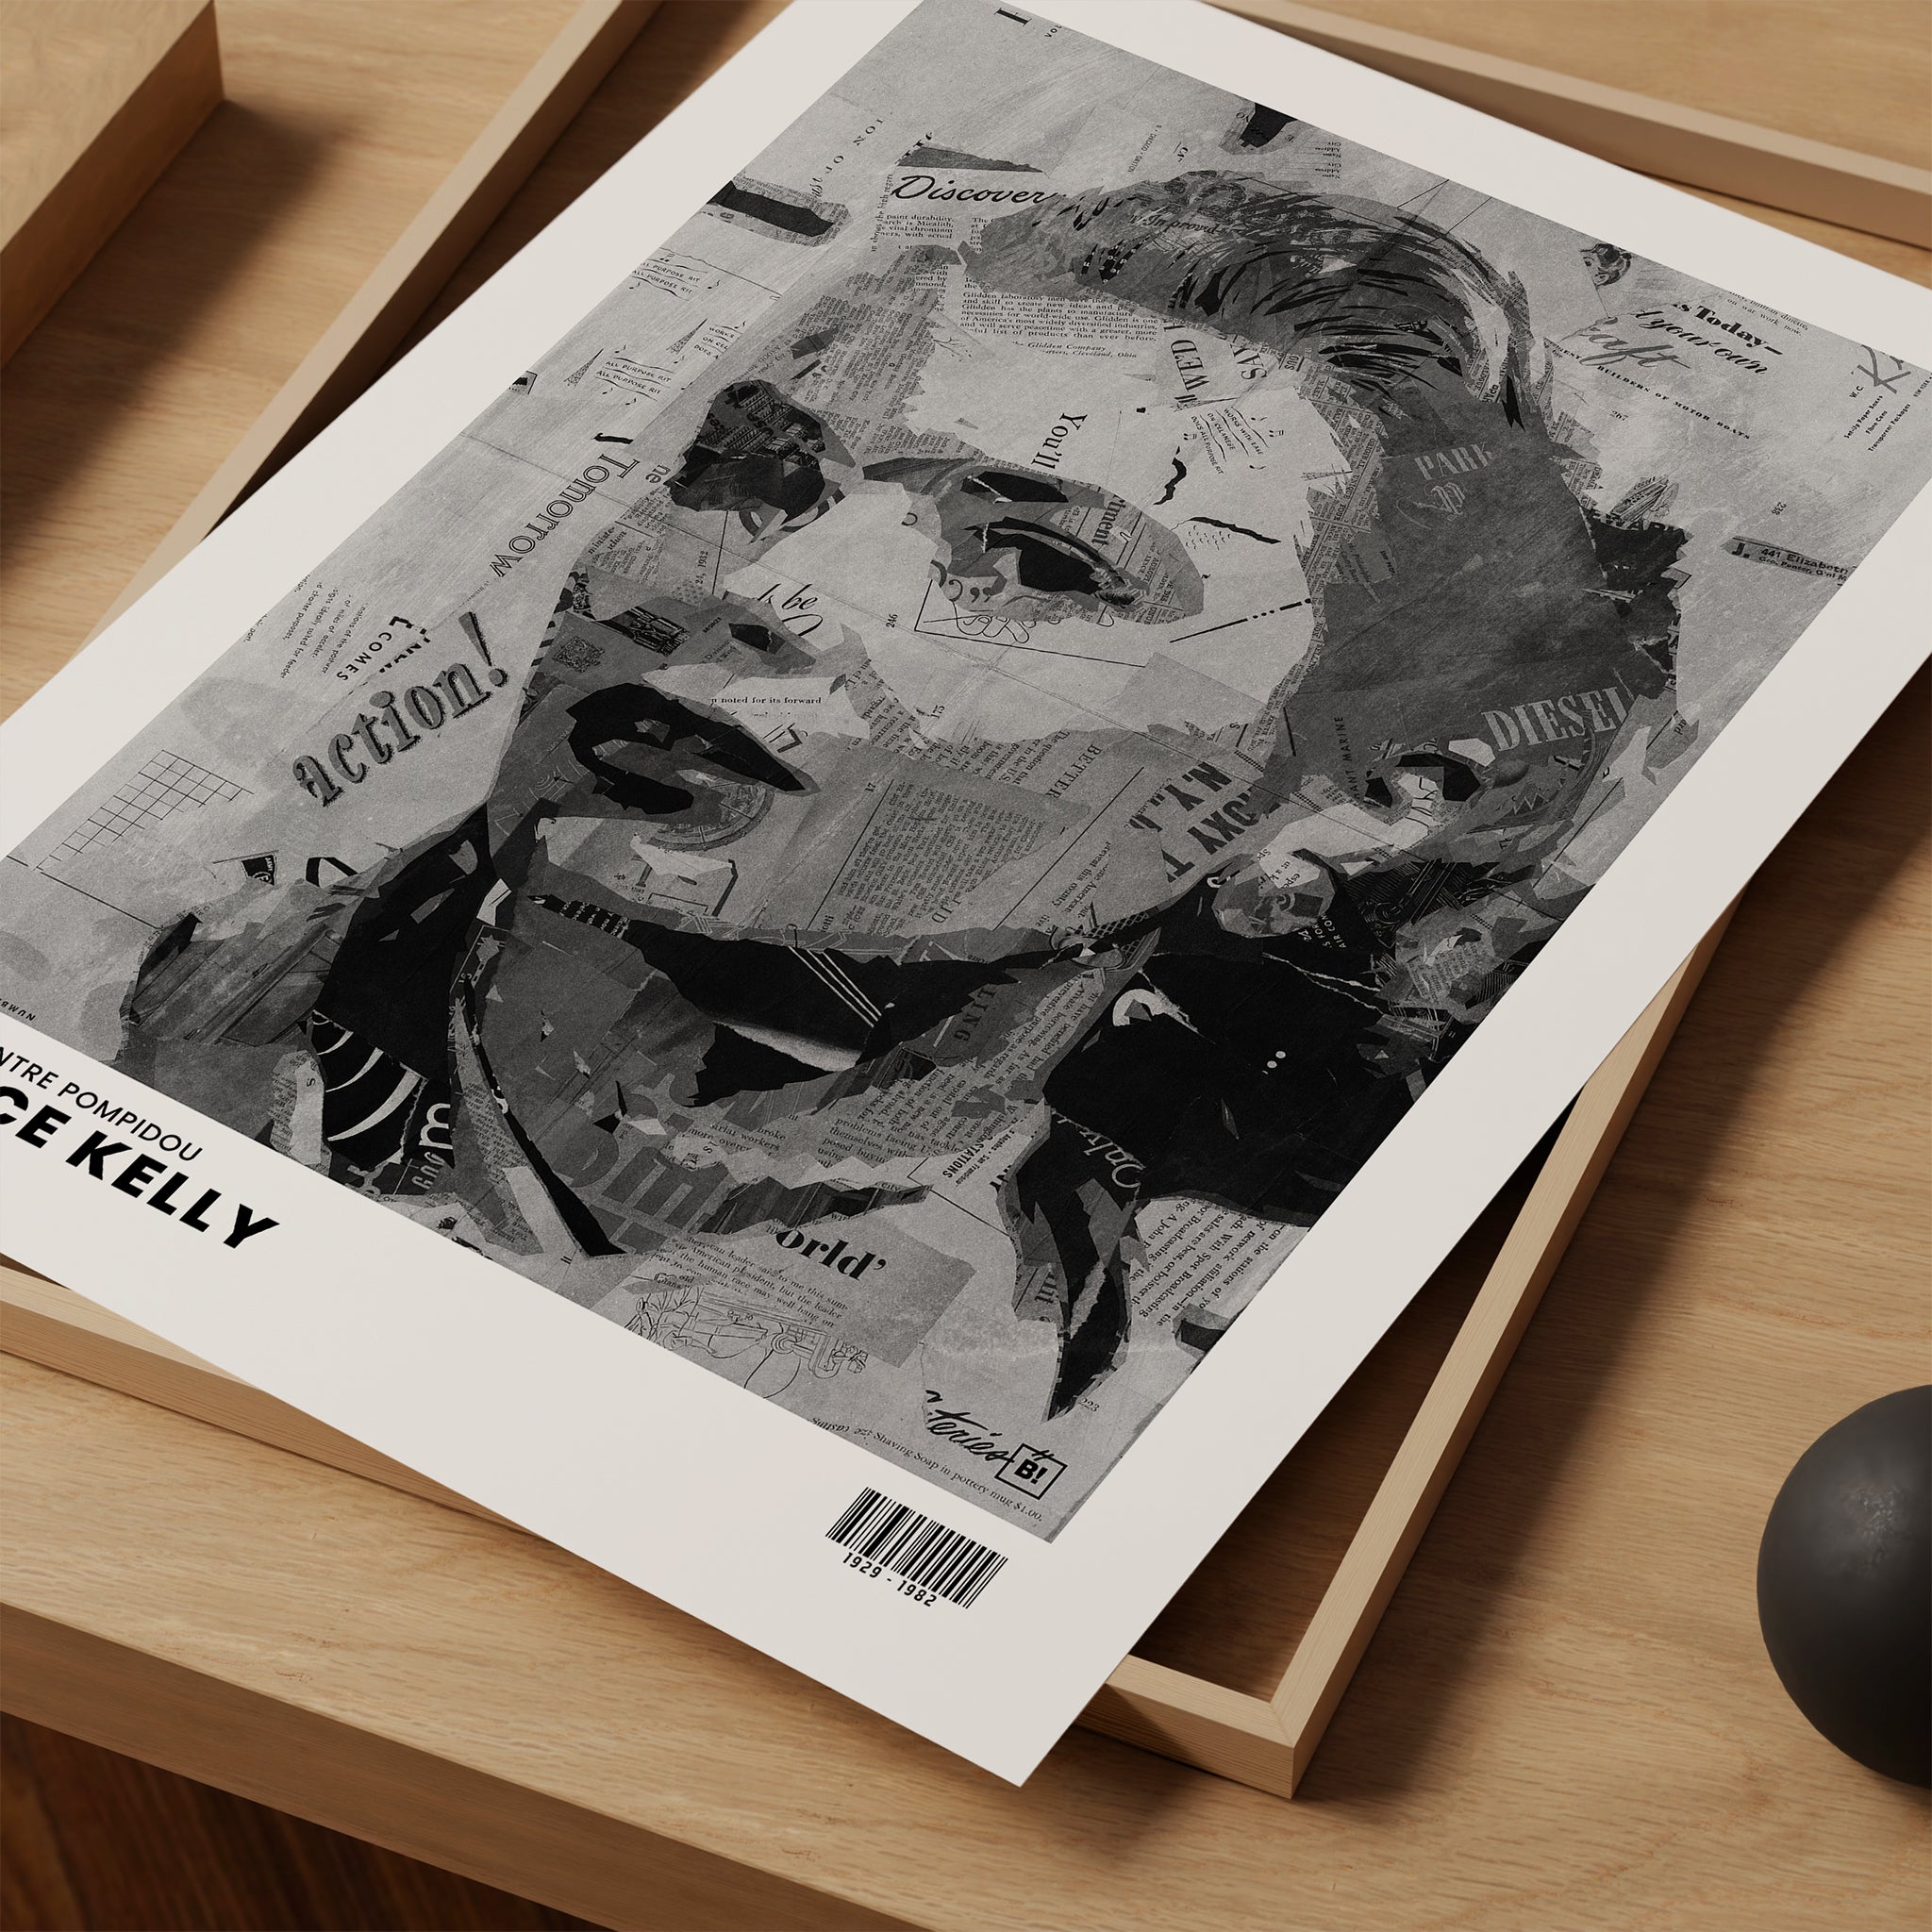 Be inspired by Iconic Grace Kelly Paris Centre Pompidou Exhibition Art Print. The artwork is presented as a print close up that captures its timeless beauty in every detail.